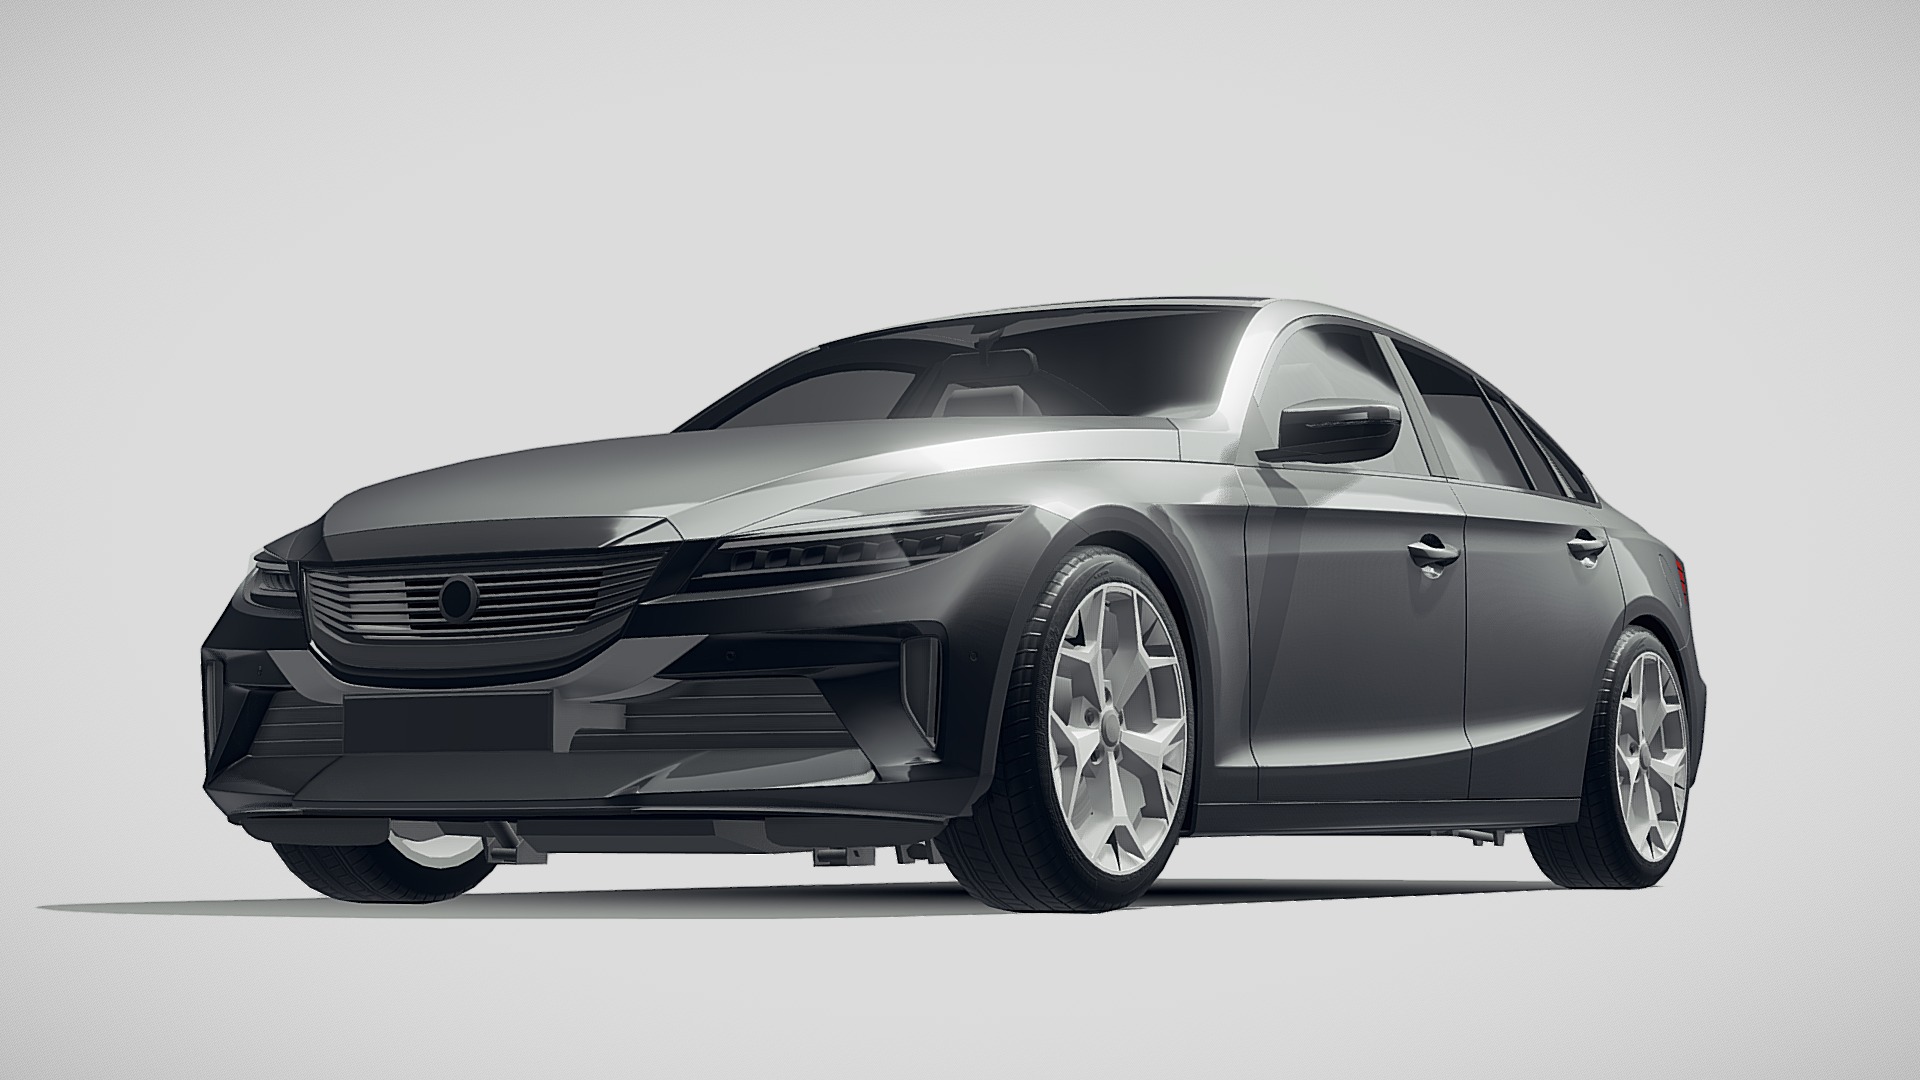 3D model LowPoly Generic Sedan 2019 - This is a 3D model of the LowPoly Generic Sedan 2019. The 3D model is about a black car with a white background.